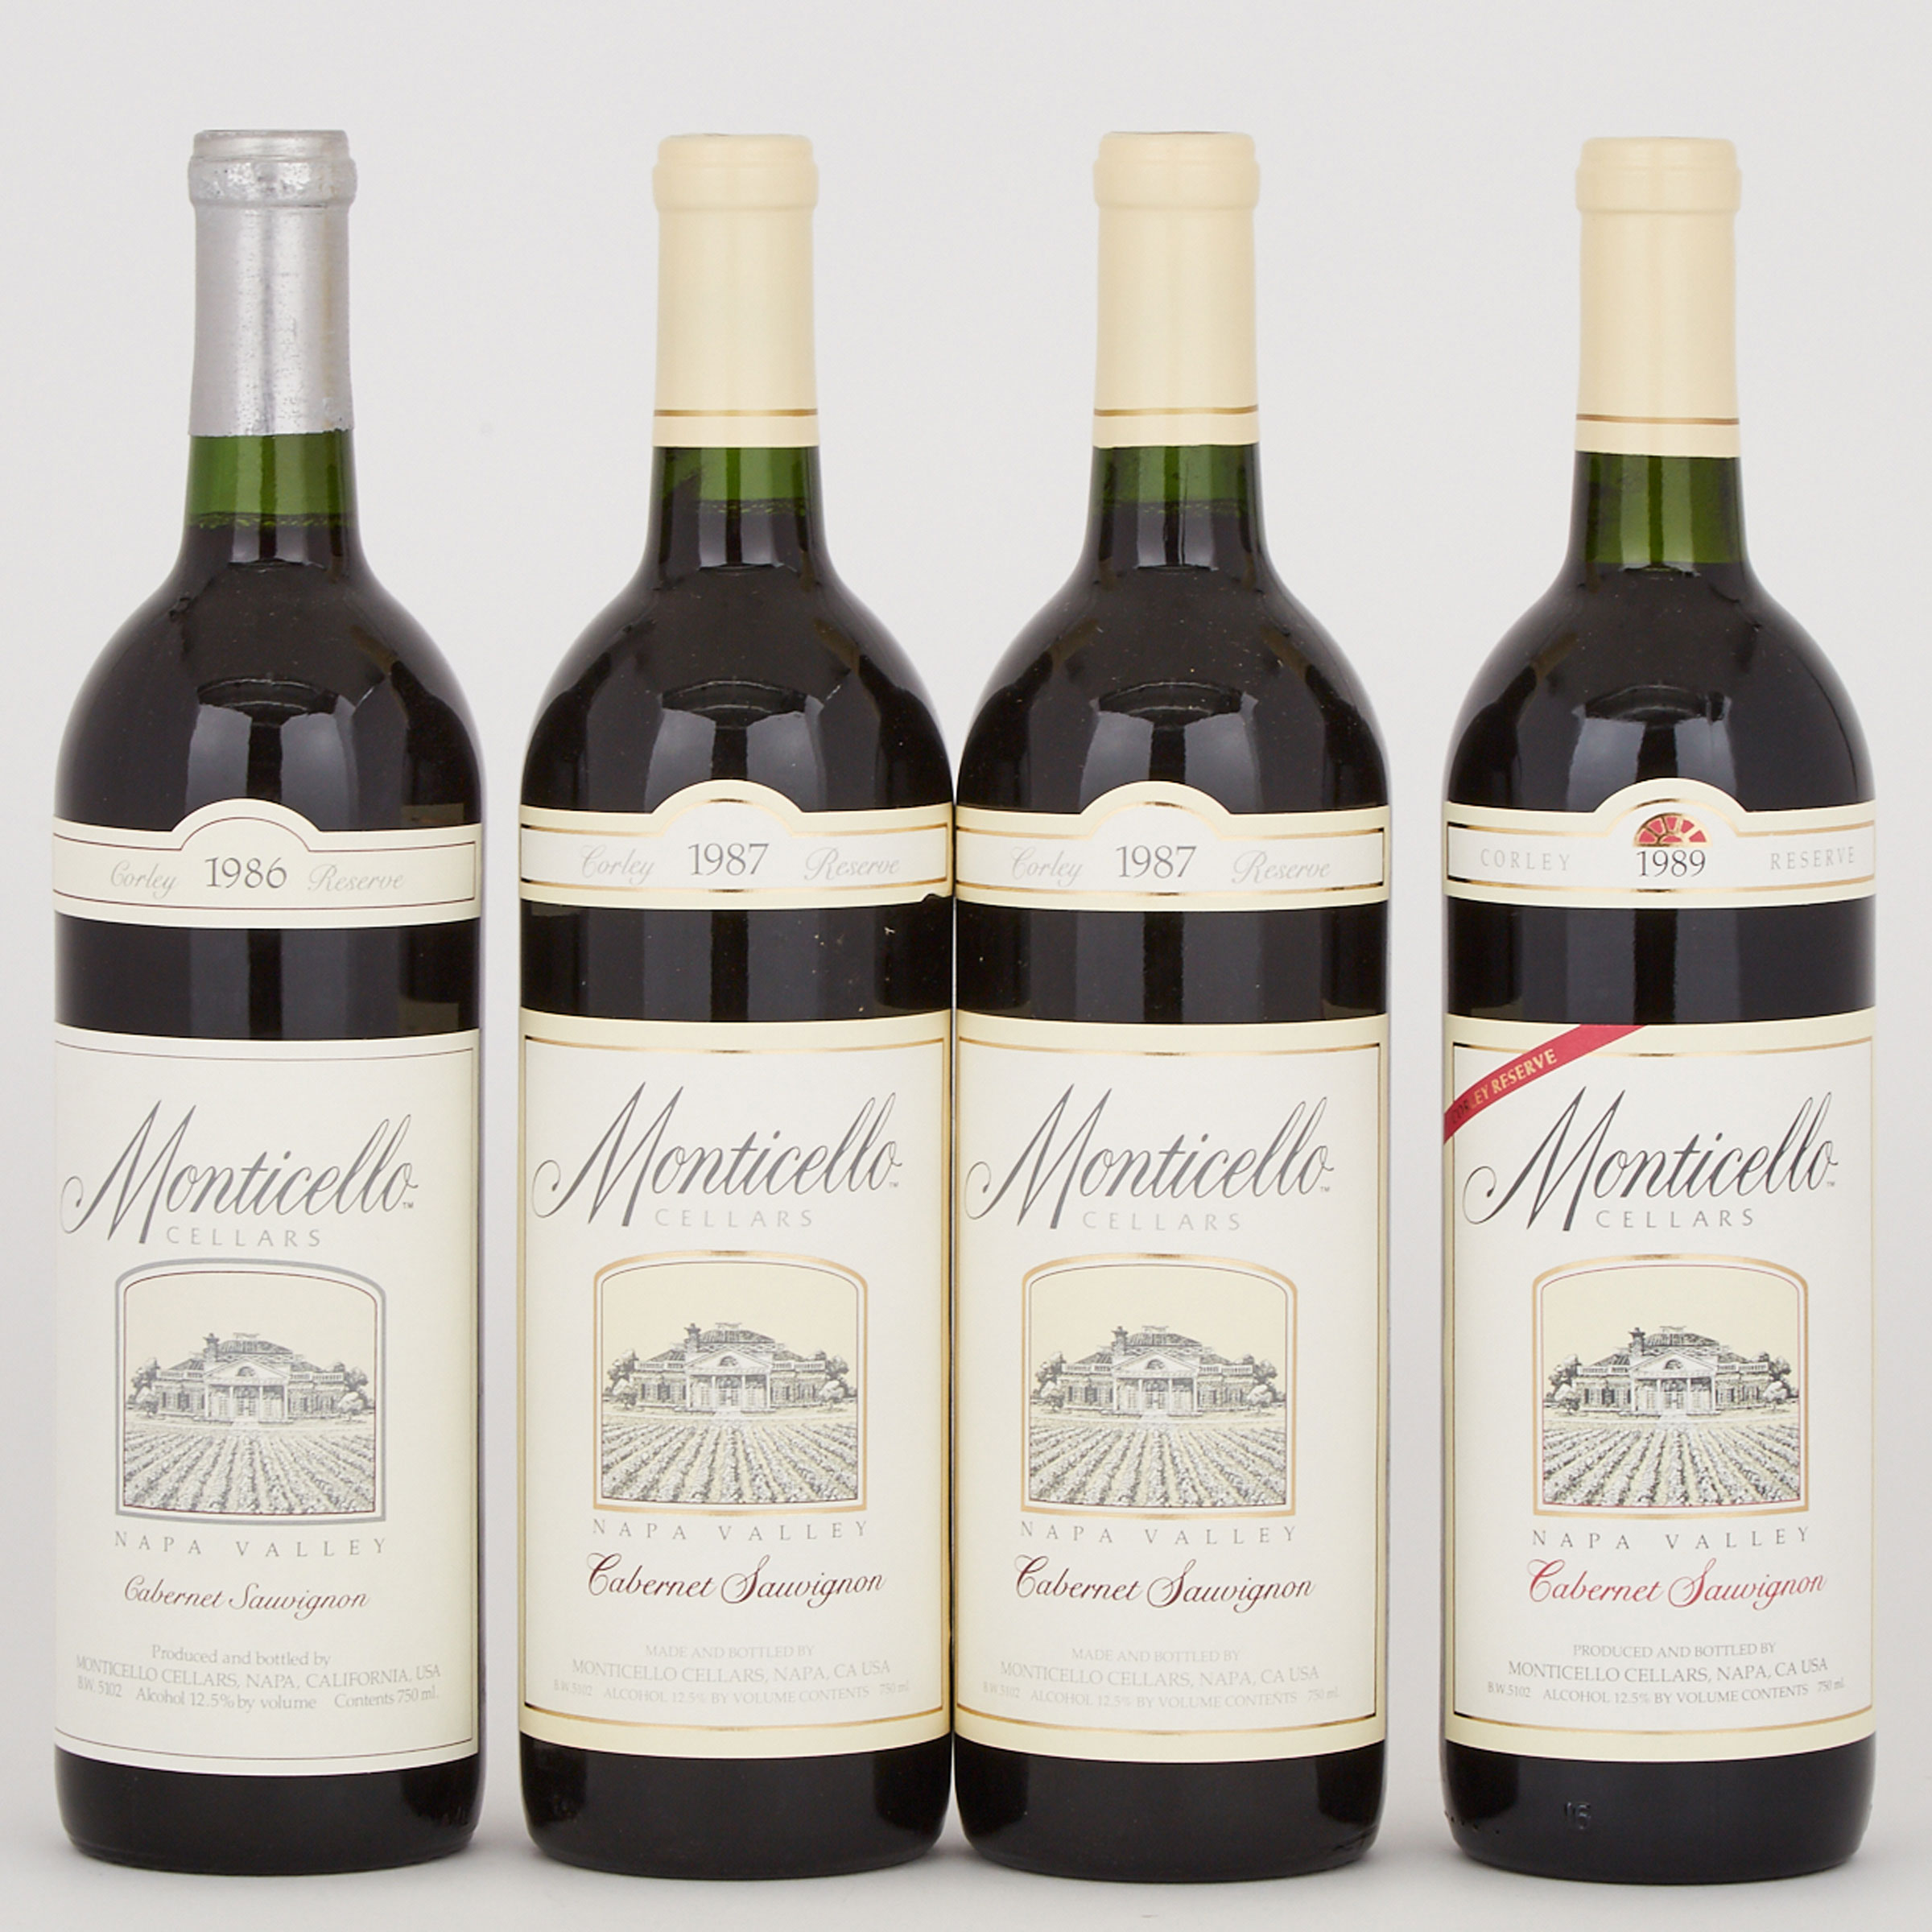 MONTICELLO VINEYARDS CORLEY FAMILY RESERVE CABERNET SAUVIGNON 1986 (1)
MONTICELLO VINEYARDS CORLEY FAMILY RESERVE CABERNET SAUVIGNON 1987 (2)
MONTICELLO VINEYARDS CORLEY FAMILY RESERVE CABERNET SAUVIGNON 1989 (1)